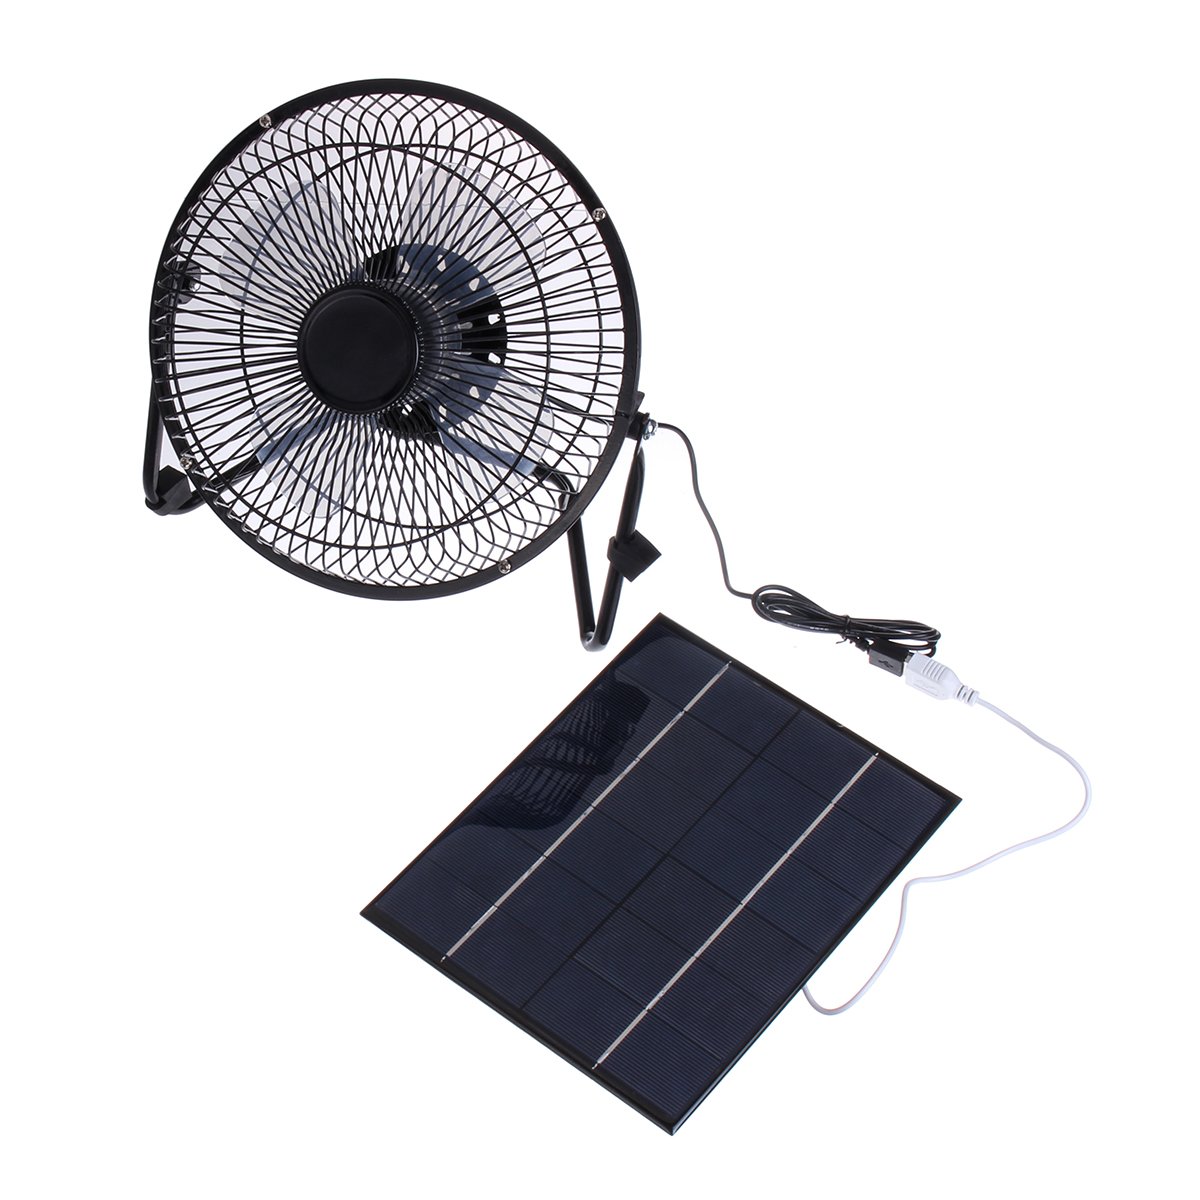 6V 6W 8 Inch Ultra-quiet USB Mini Solar Panel Fan For Outdoor Camping 1